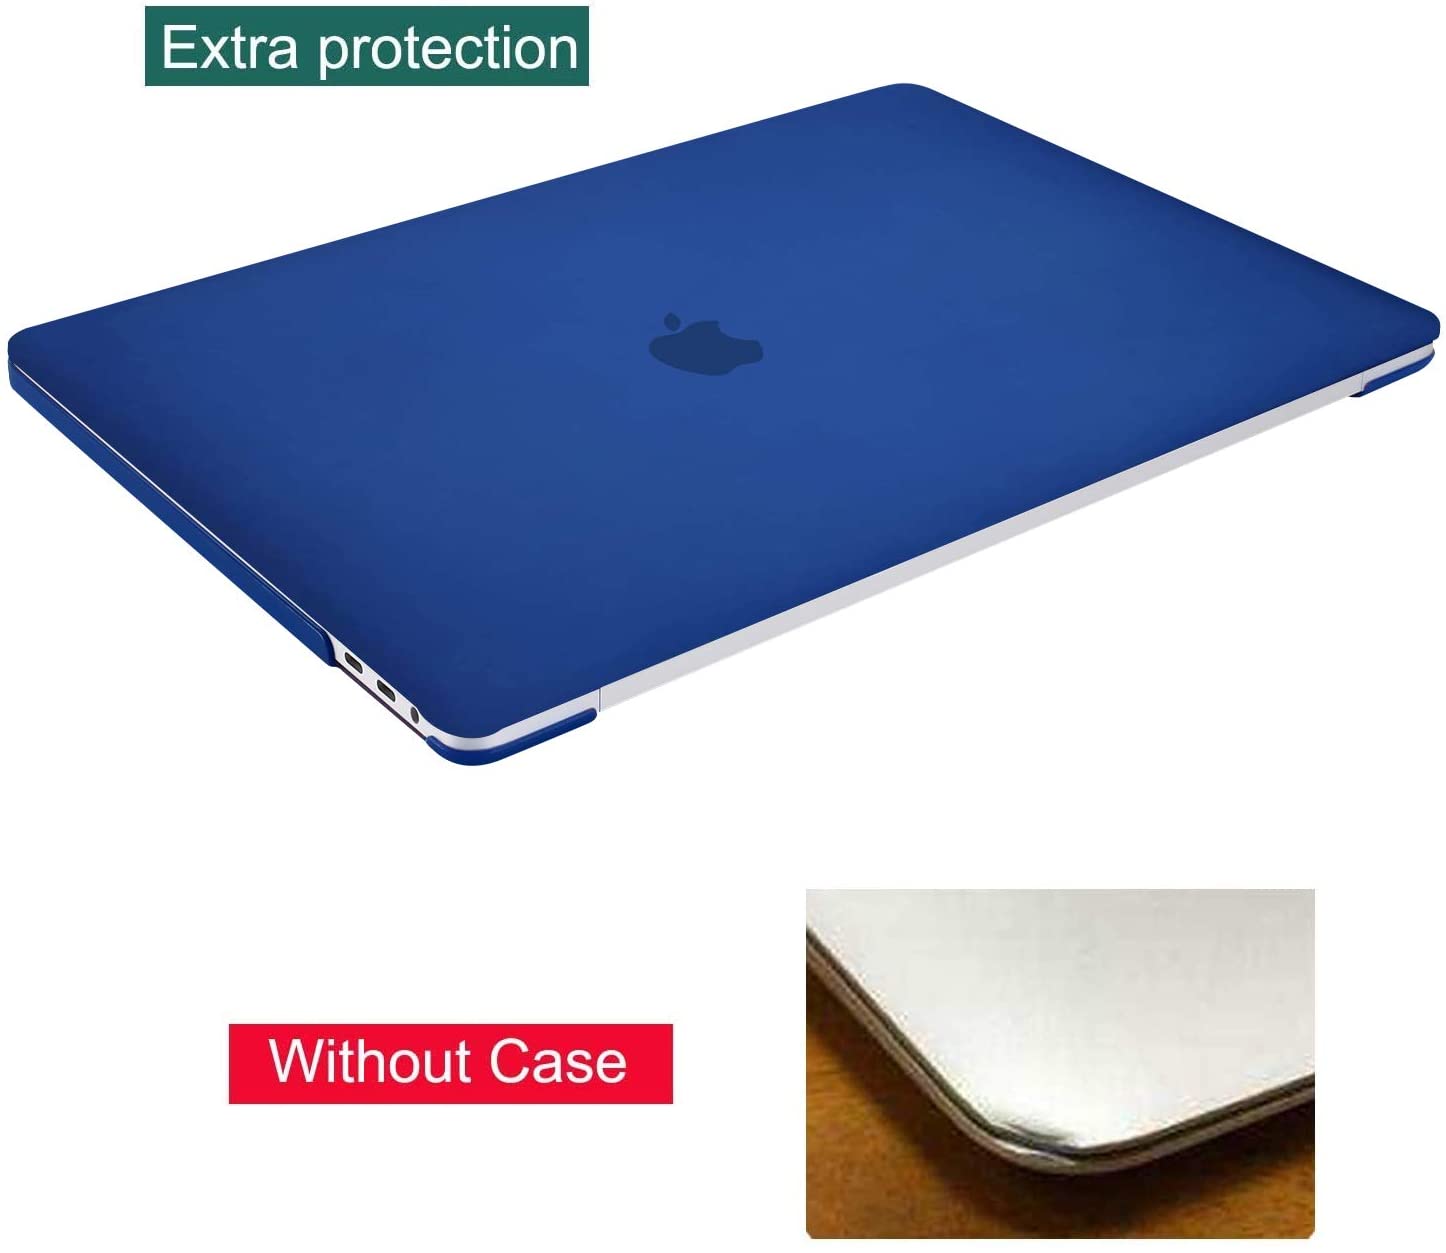 Royal blue -  MacBook Pro 13 inch Case 2012 - 2015 Release. Hard case, keyboard protector. - e4cents